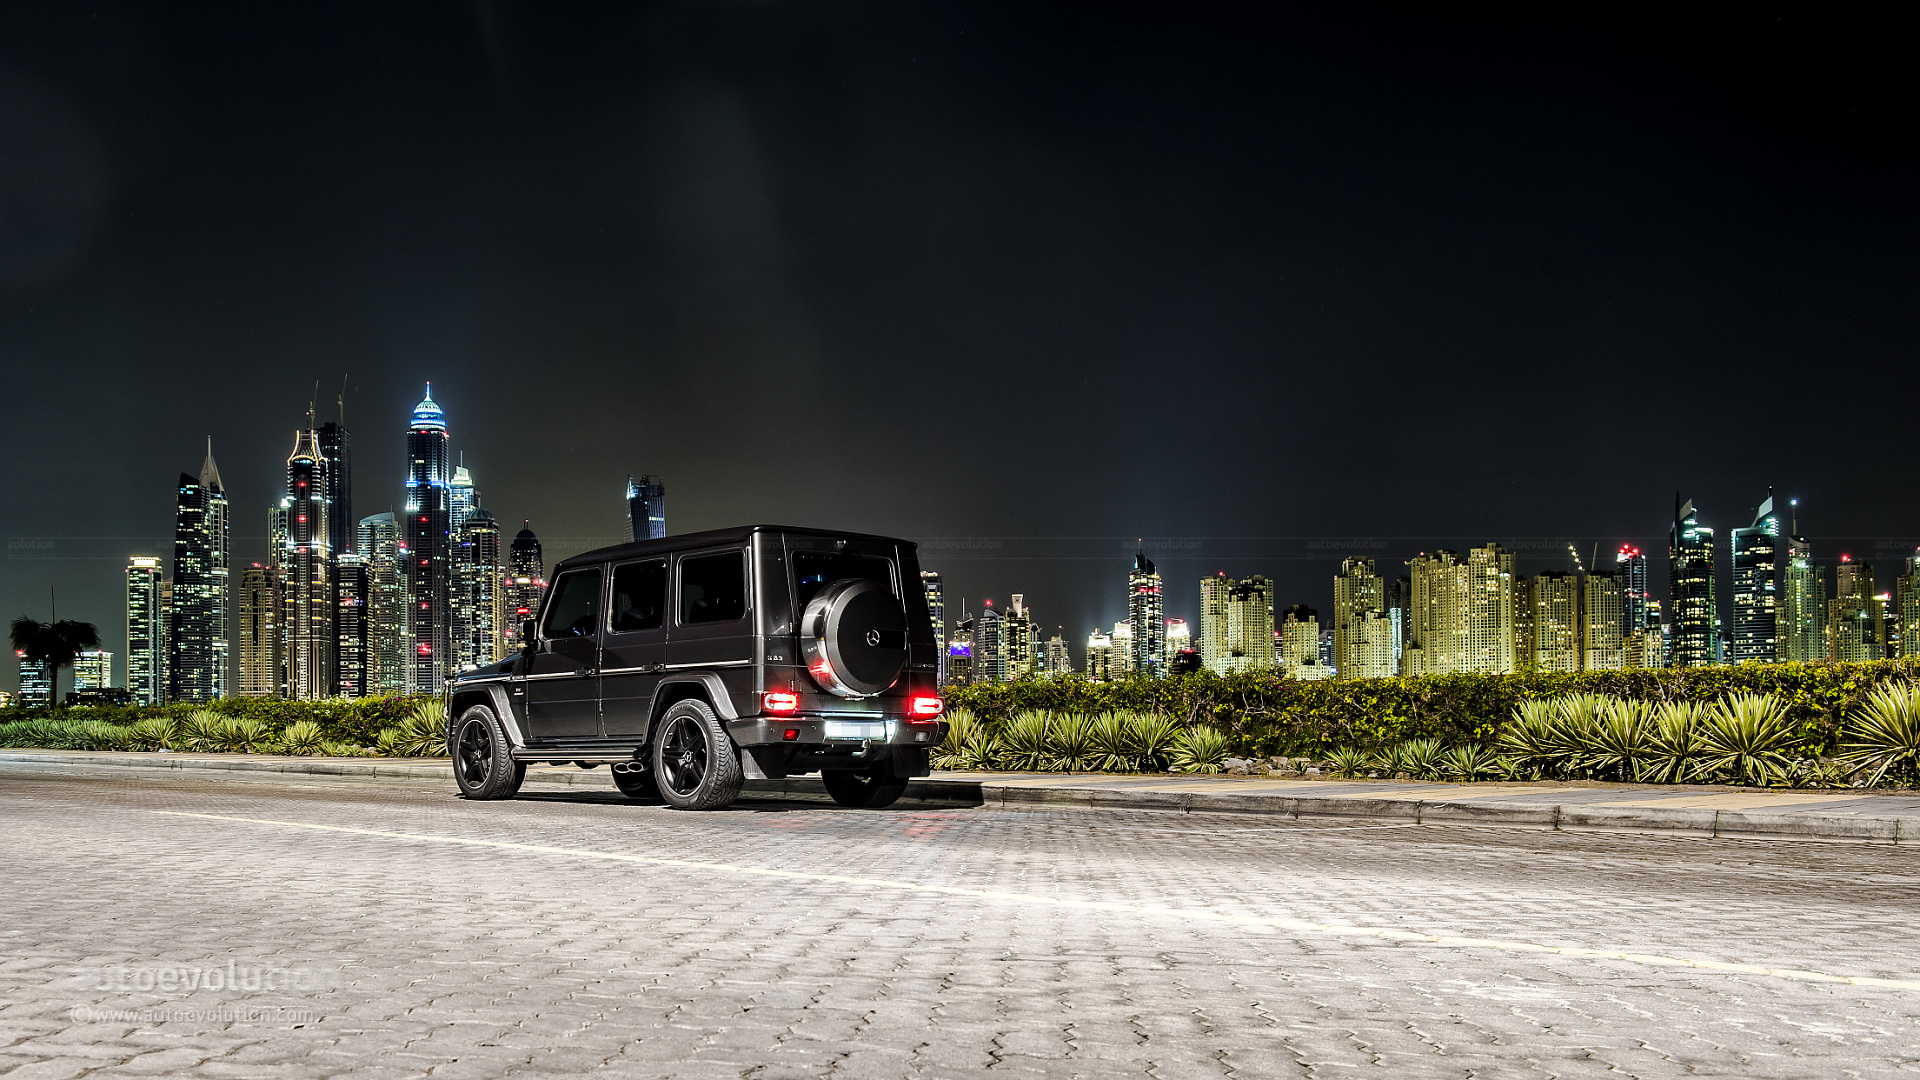 Mercedes Benz G Class To Be Made At Least Until 2019 - G Class 2019 Hd - HD Wallpaper 